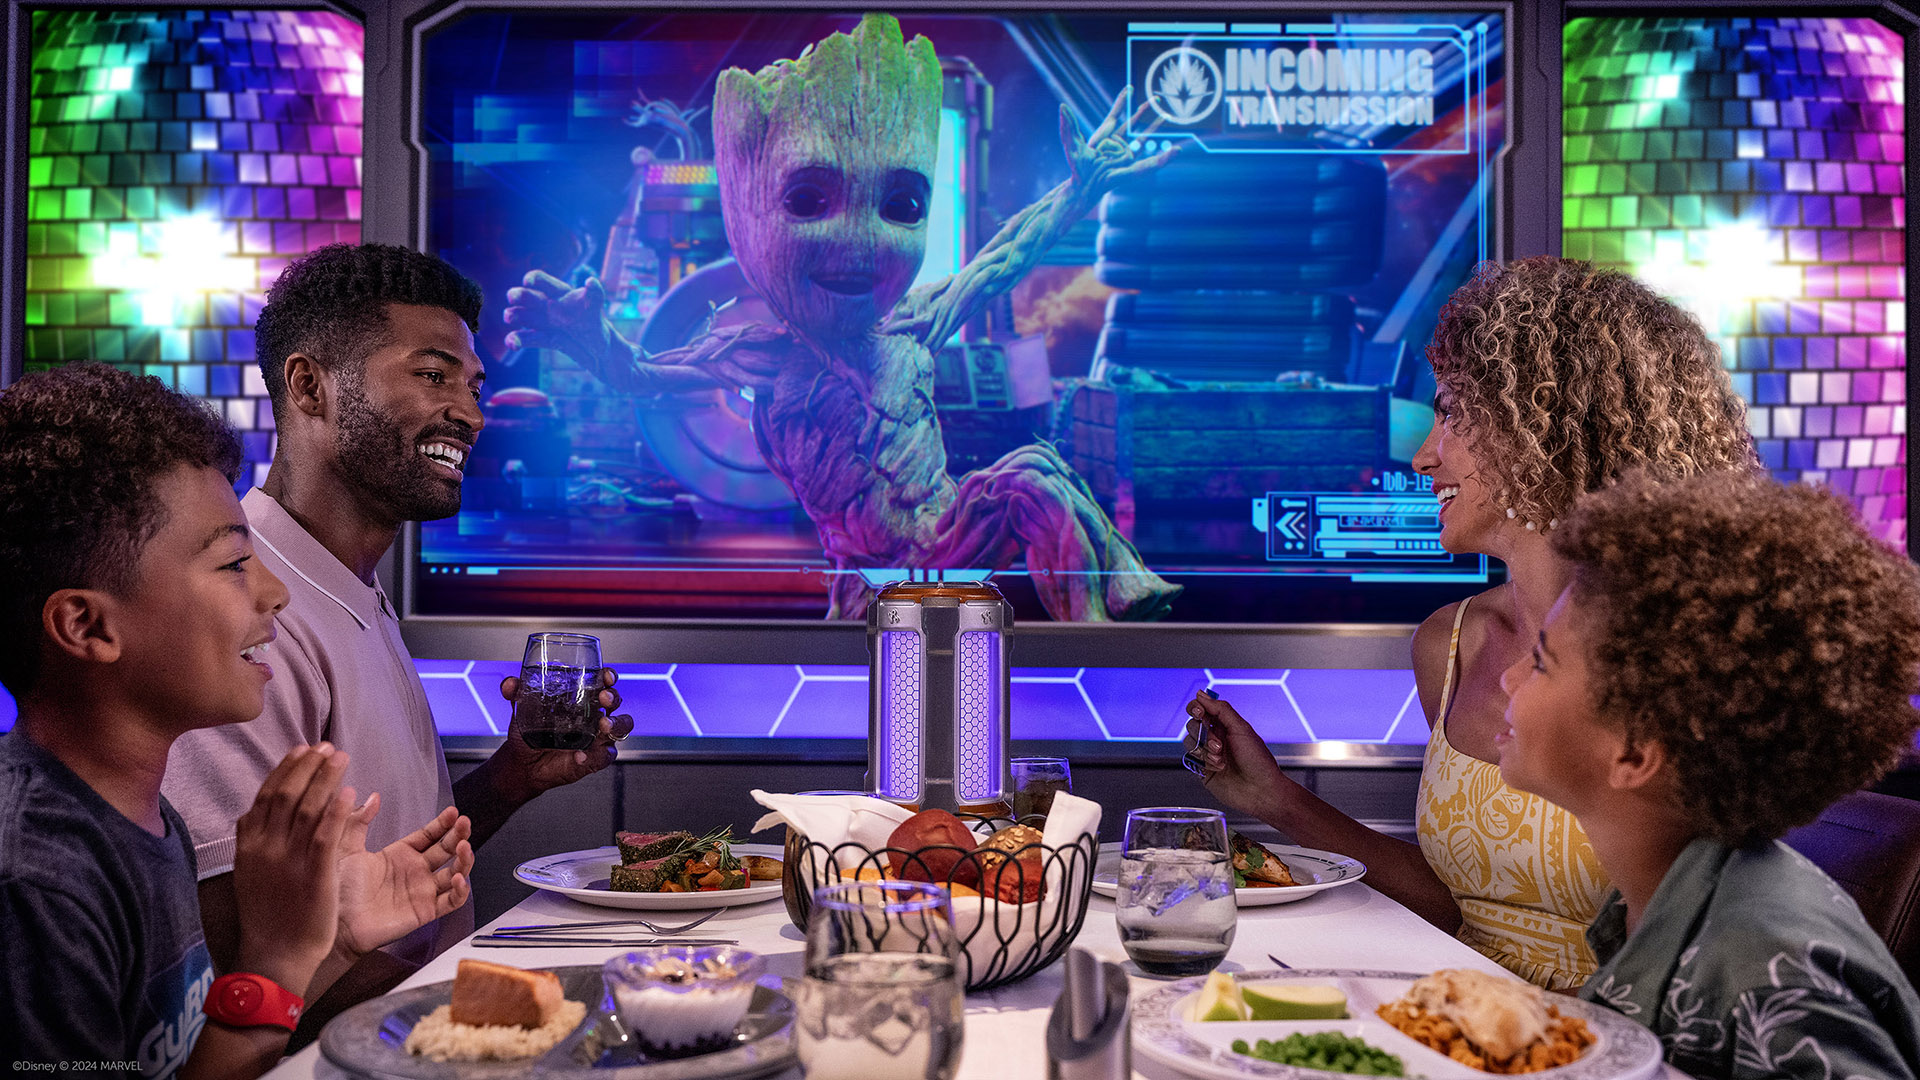 Worlds of Marvel, Disney Cruise Line’s Marvel-themed dining experience